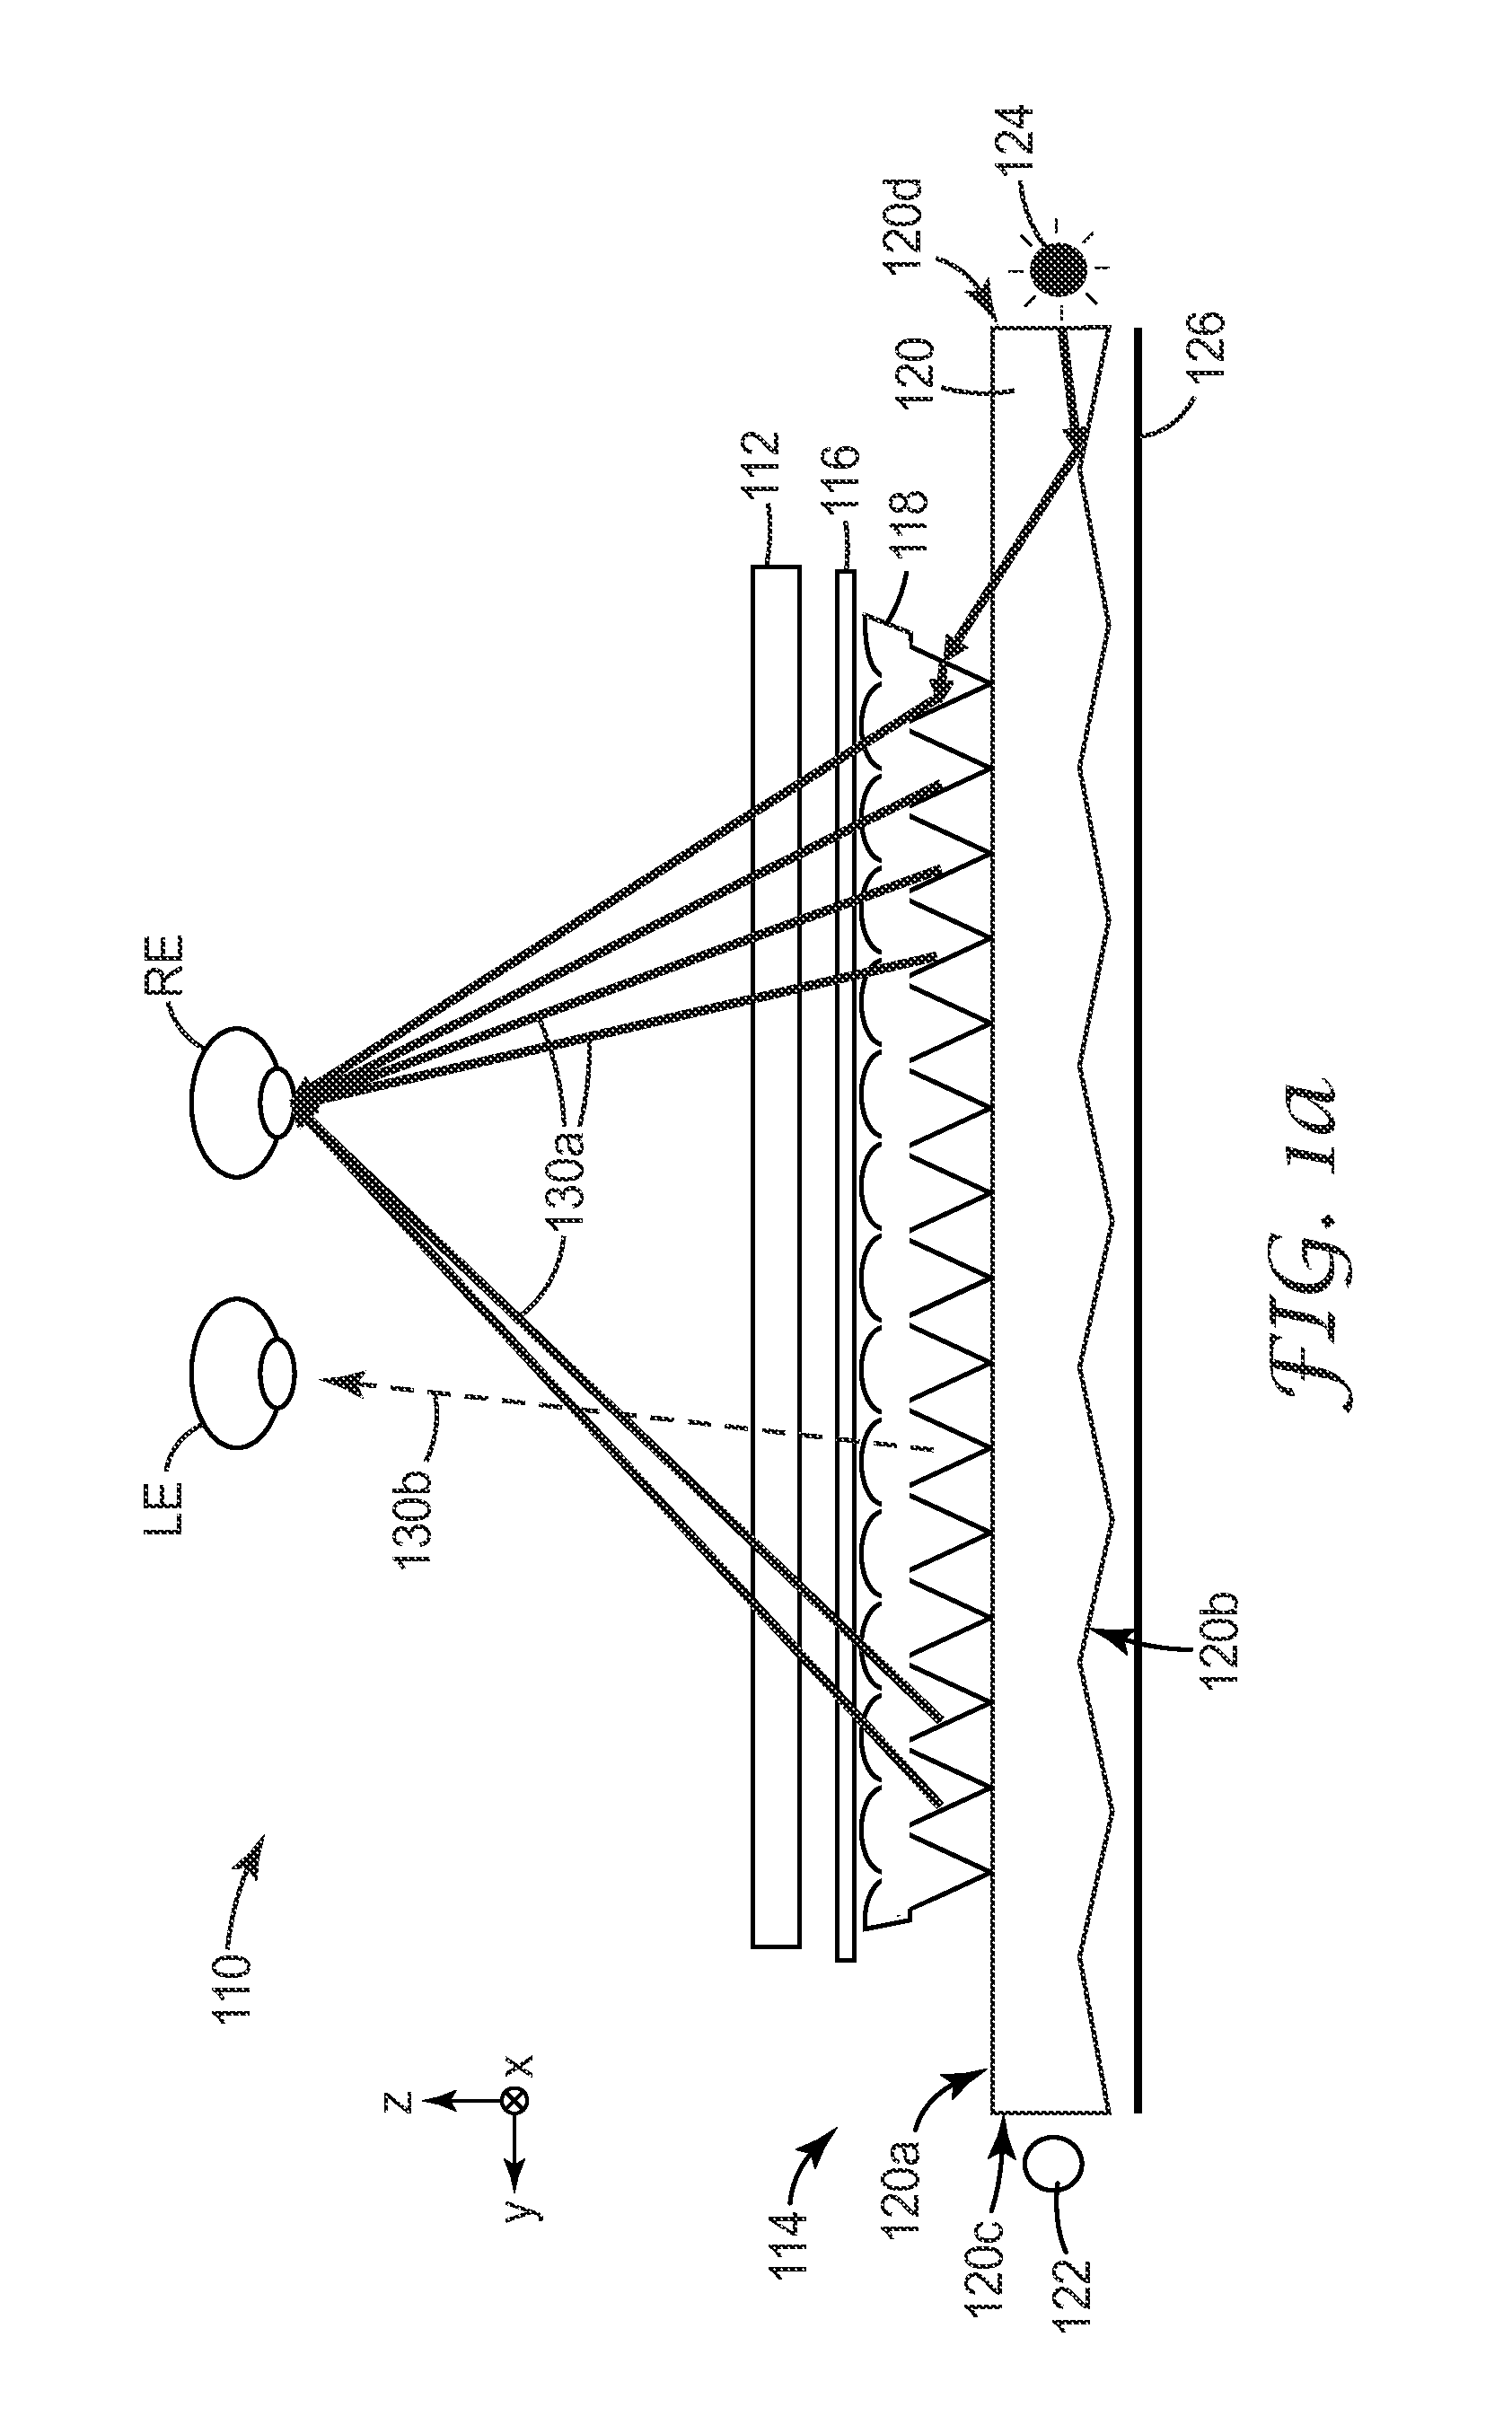 Microreplicated Film for Attachment to Autostereoscopic Display Components